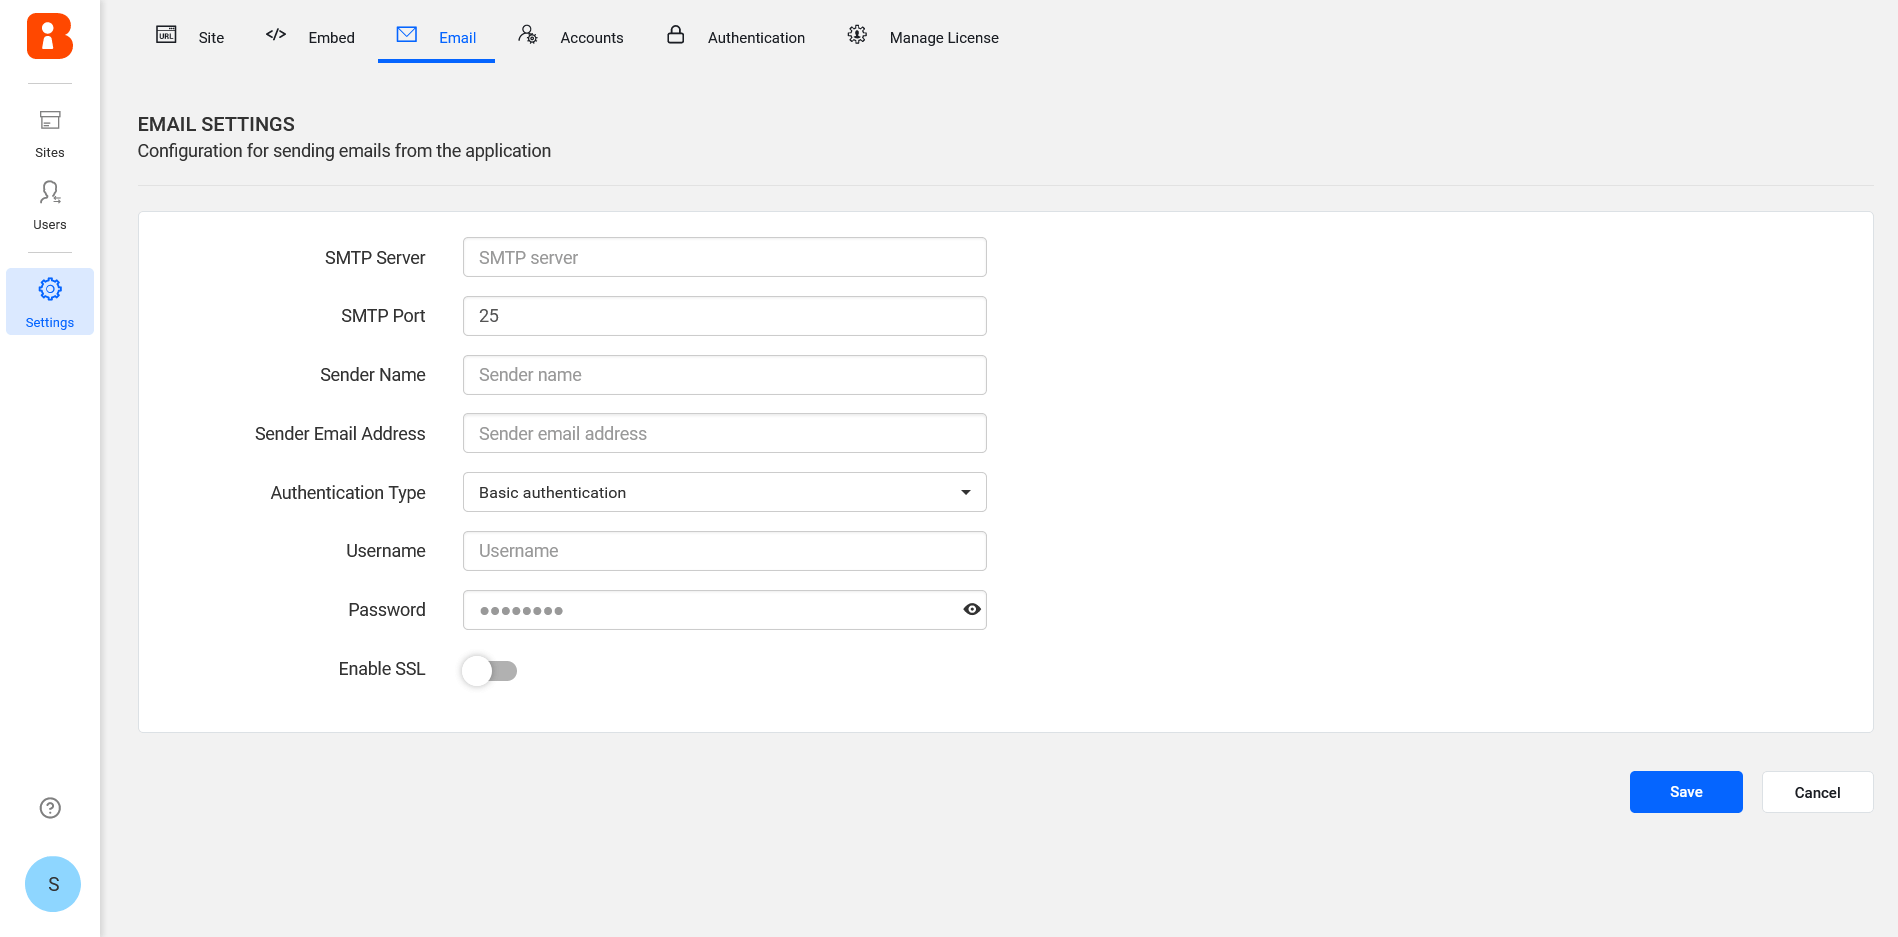 Email Settings page